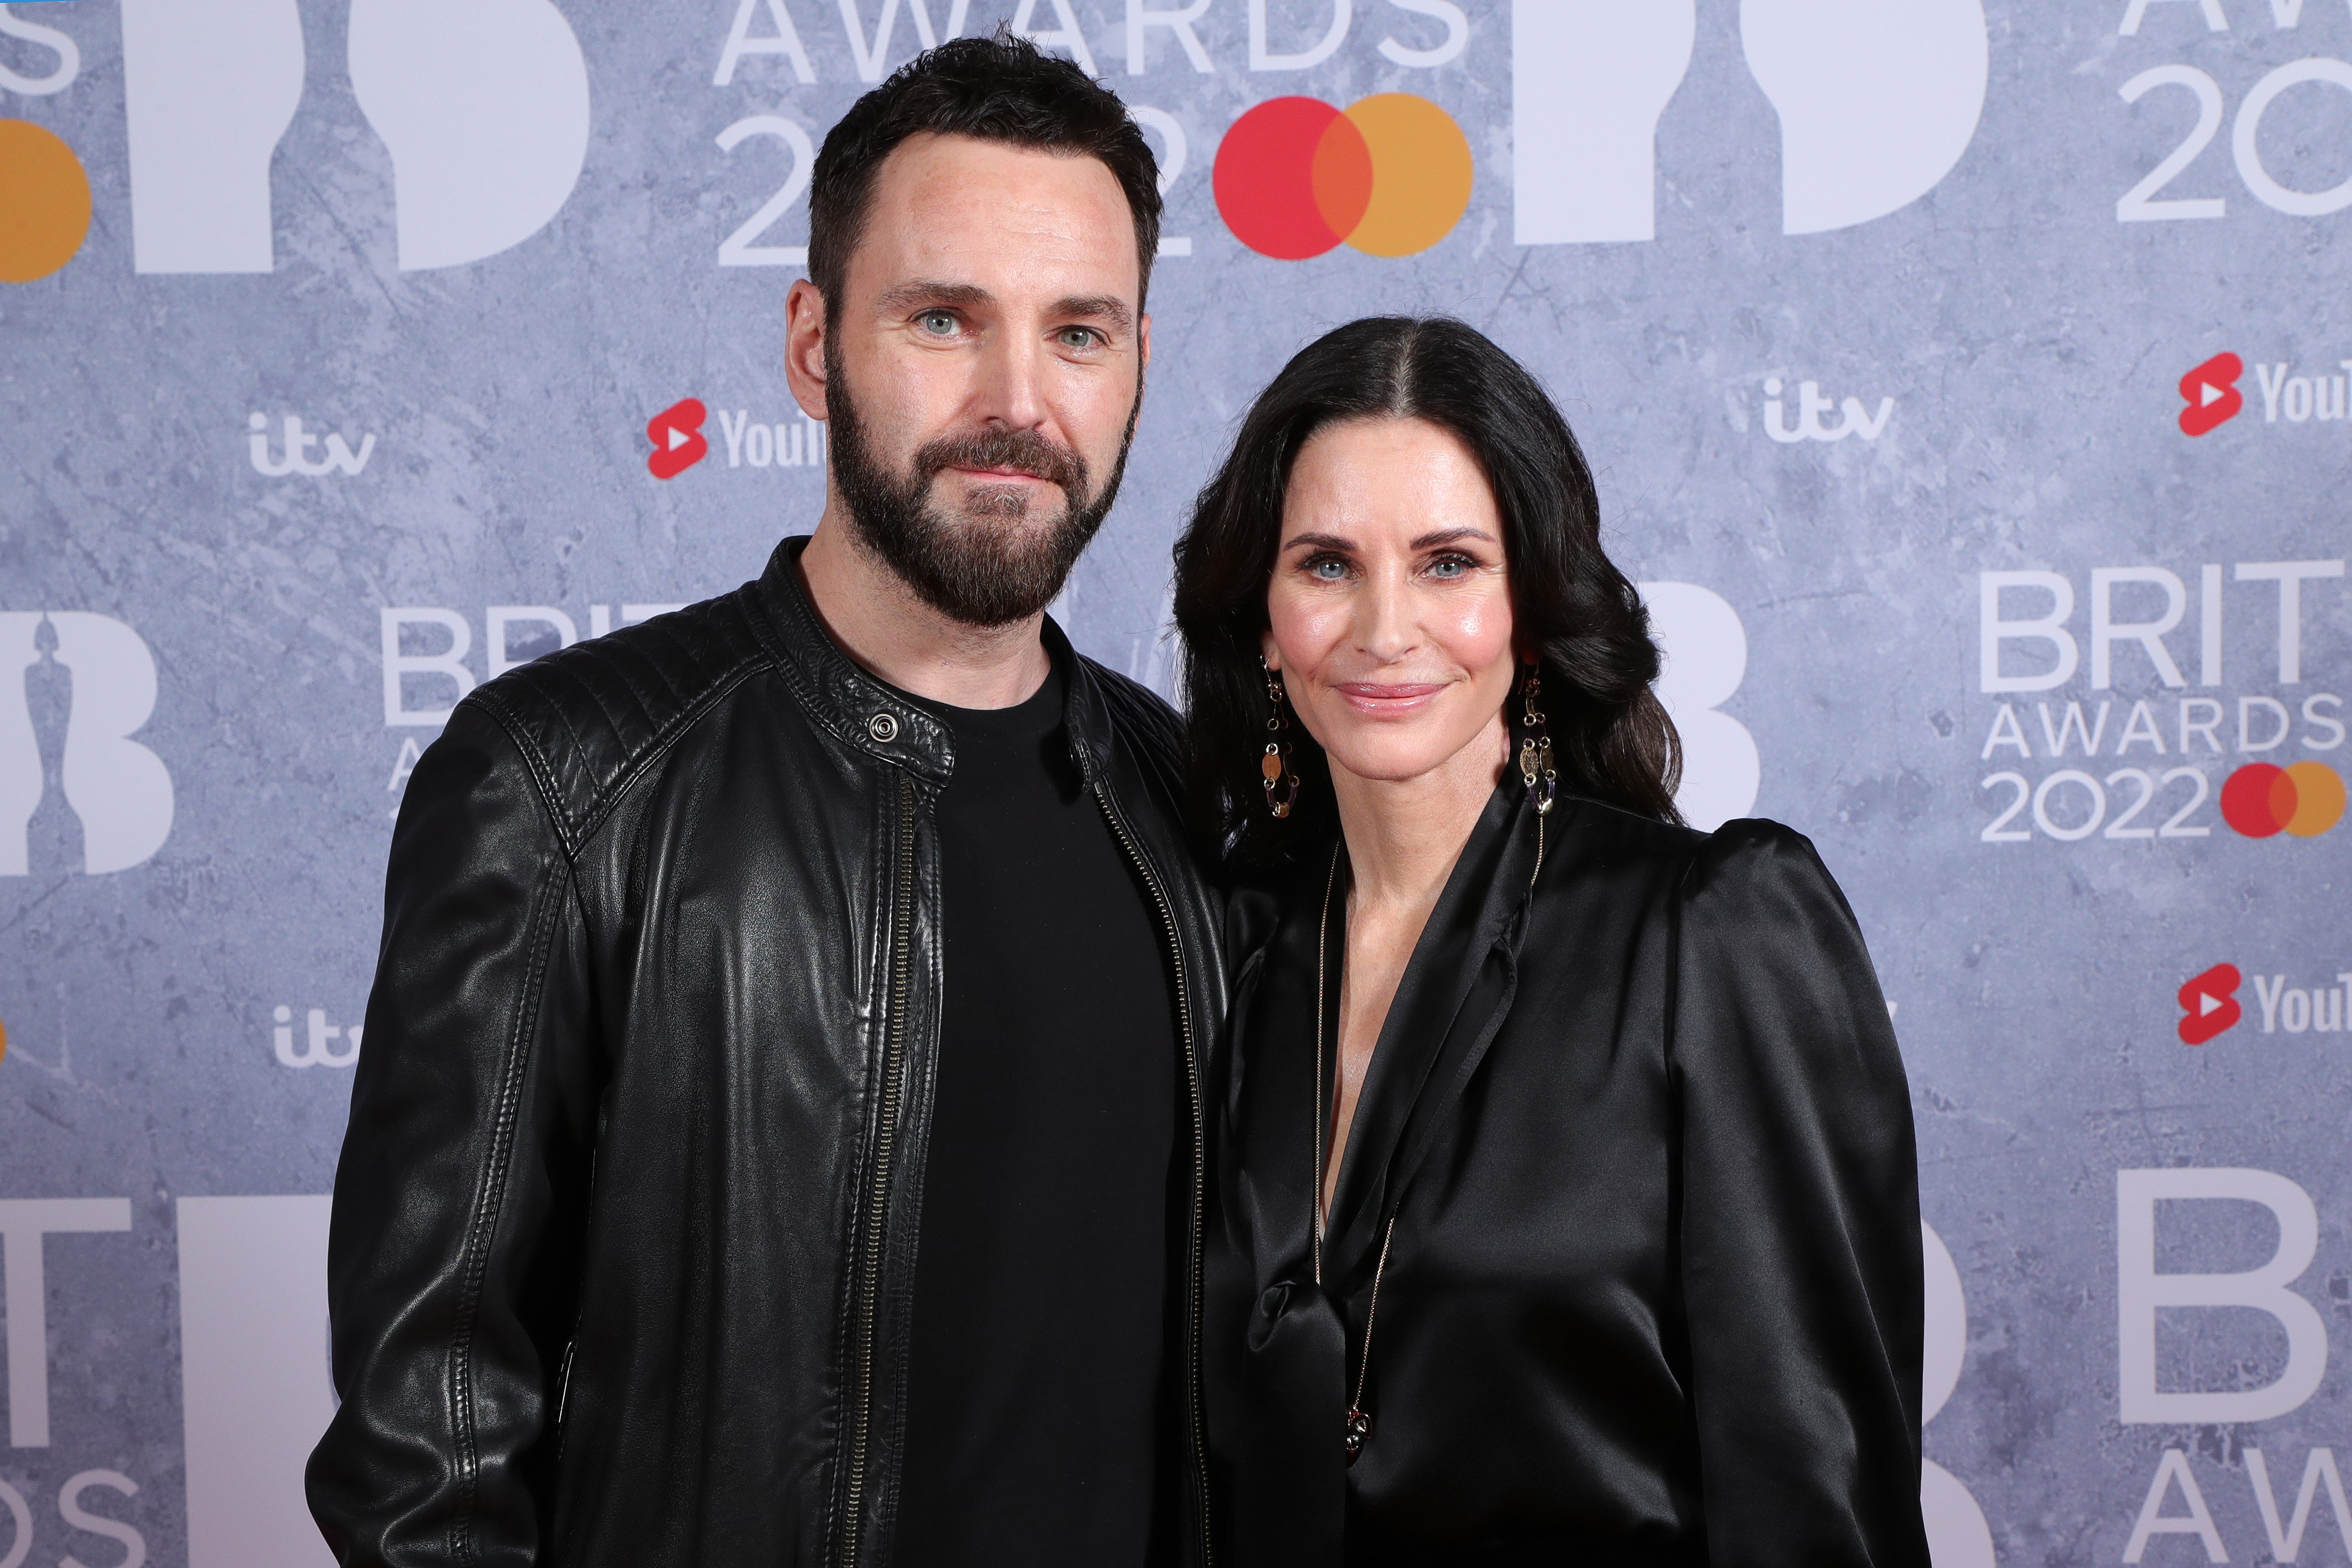 Johnny McDaid and Courteney Cox on the VIP red carpet at The BRIT Awards 2022 on February 08, 2022 | Source: Getty Images